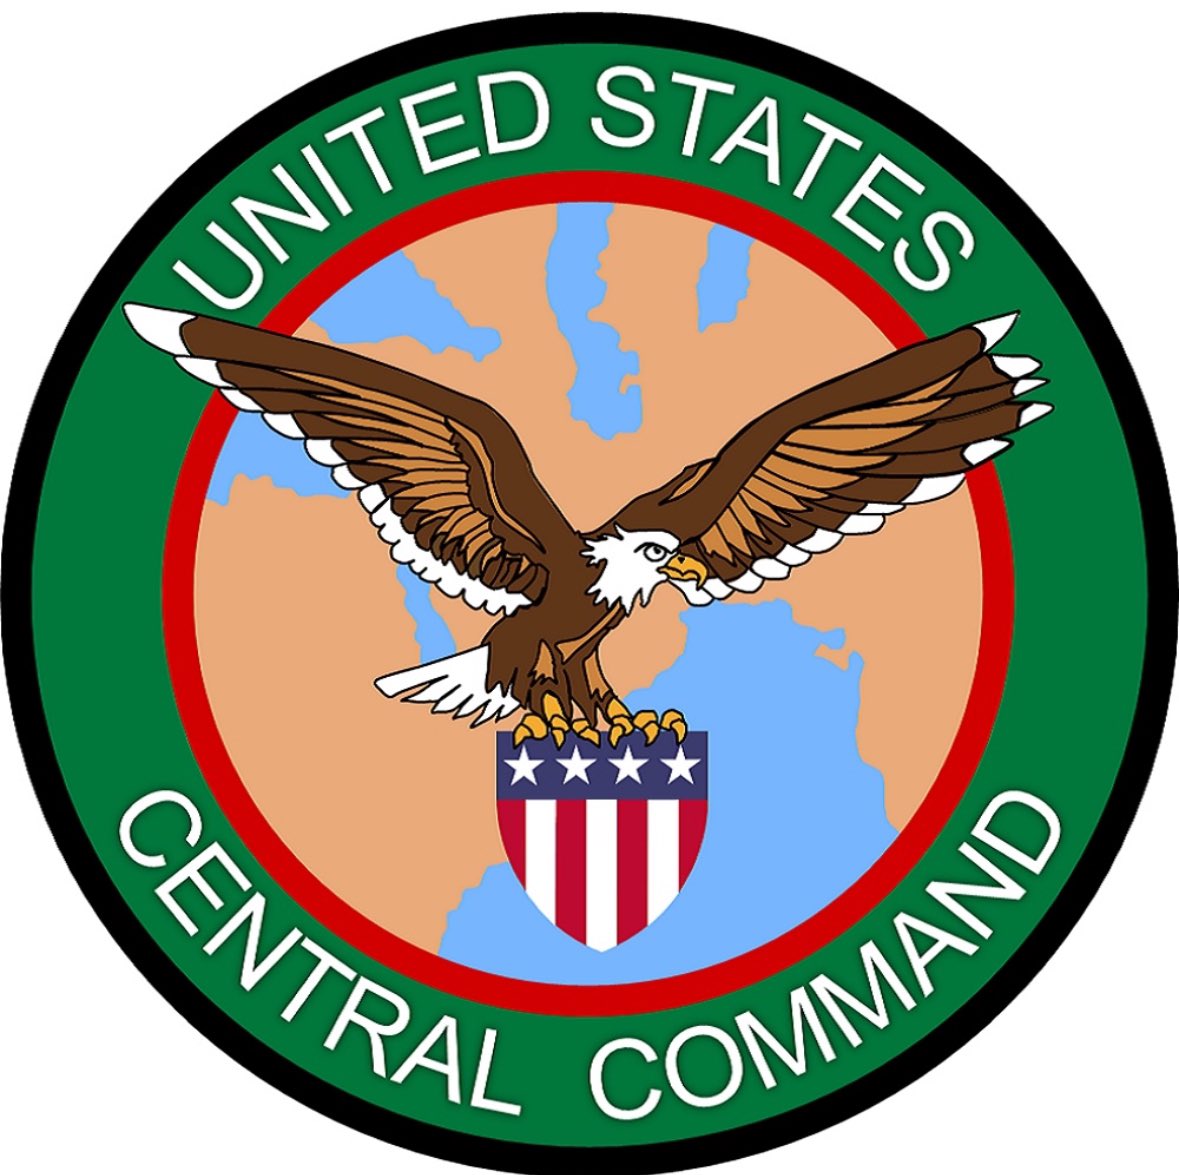 May 15 CENTCOM Update

At approximately 9 p.m. (Sanaa time) on May 14, U.S. Central Command (USCENTCOM) forces successfully destroyed four uncrewed aerial system (UAS) in an Iranian-backed Houthi controlled area of Yemen.  

It was determined these systems presented an imminent… https://t.co/c63czd9WTx https://t.co/oJfjv8h4ng